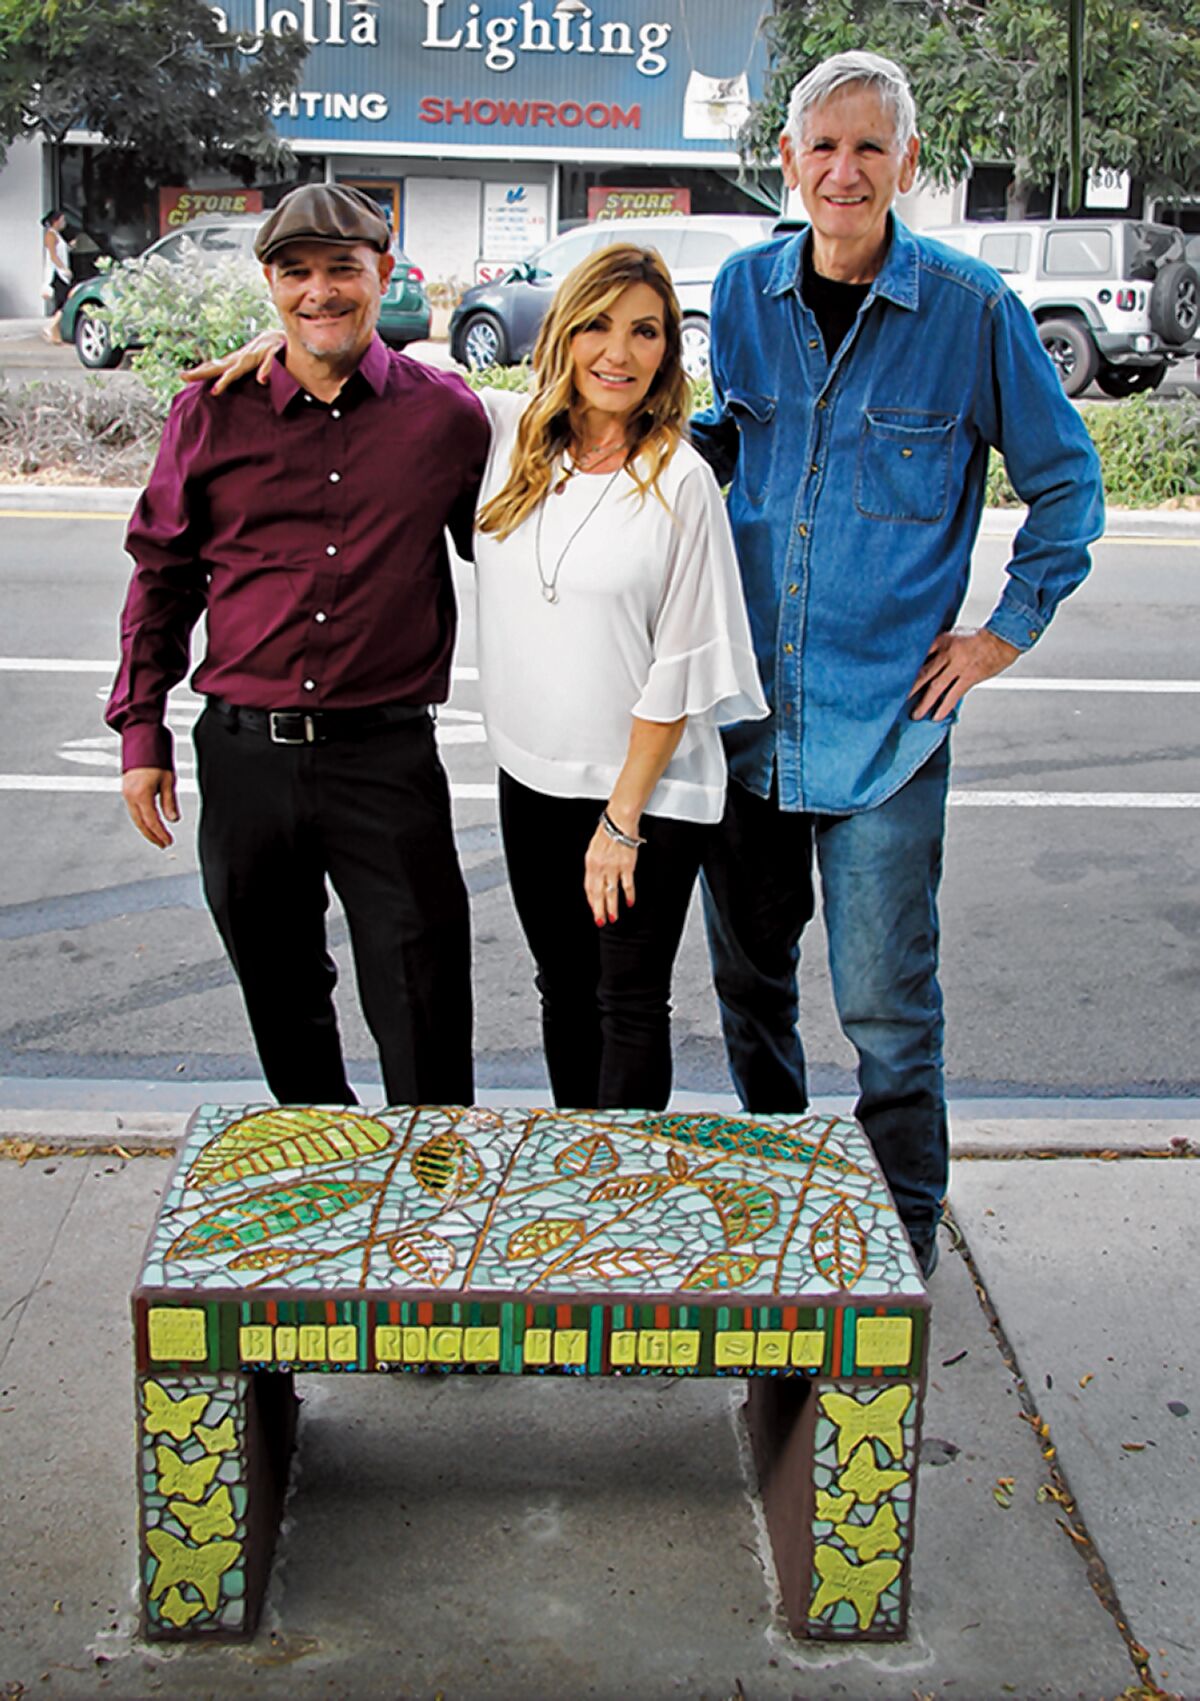 Thom Kezas, Krista Robbins and AJ Mason. Bird Rock Community Council added this new community bench to its series titled "Dancing Through Life." The mosaic bench was dedicated Sept. 22, 2019 at 5643 La Jolla Blvd. to honor Joanne Mason.